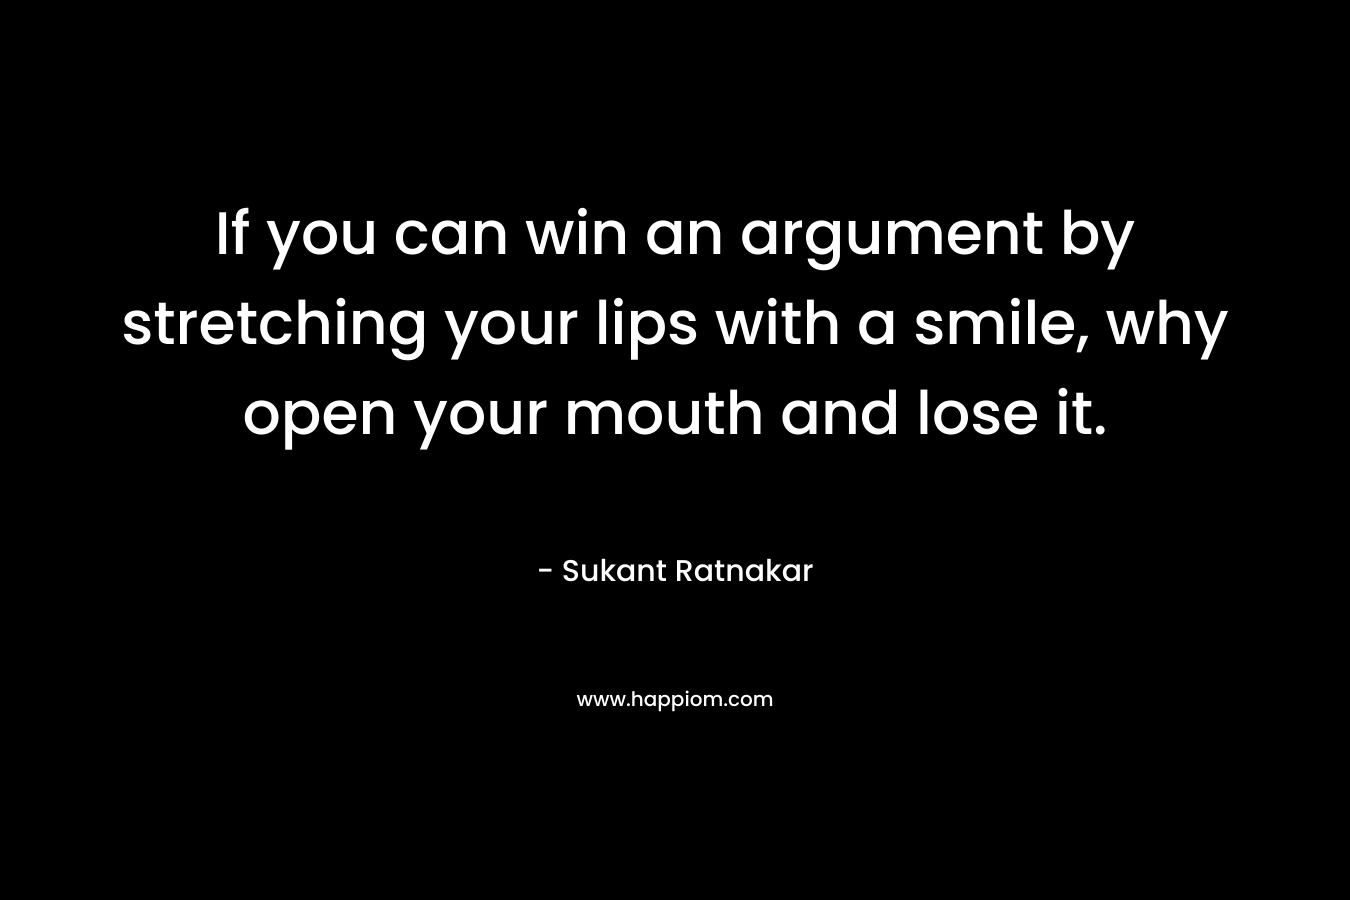 If you can win an argument by stretching your lips with a smile, why open your mouth and lose it. – Sukant Ratnakar